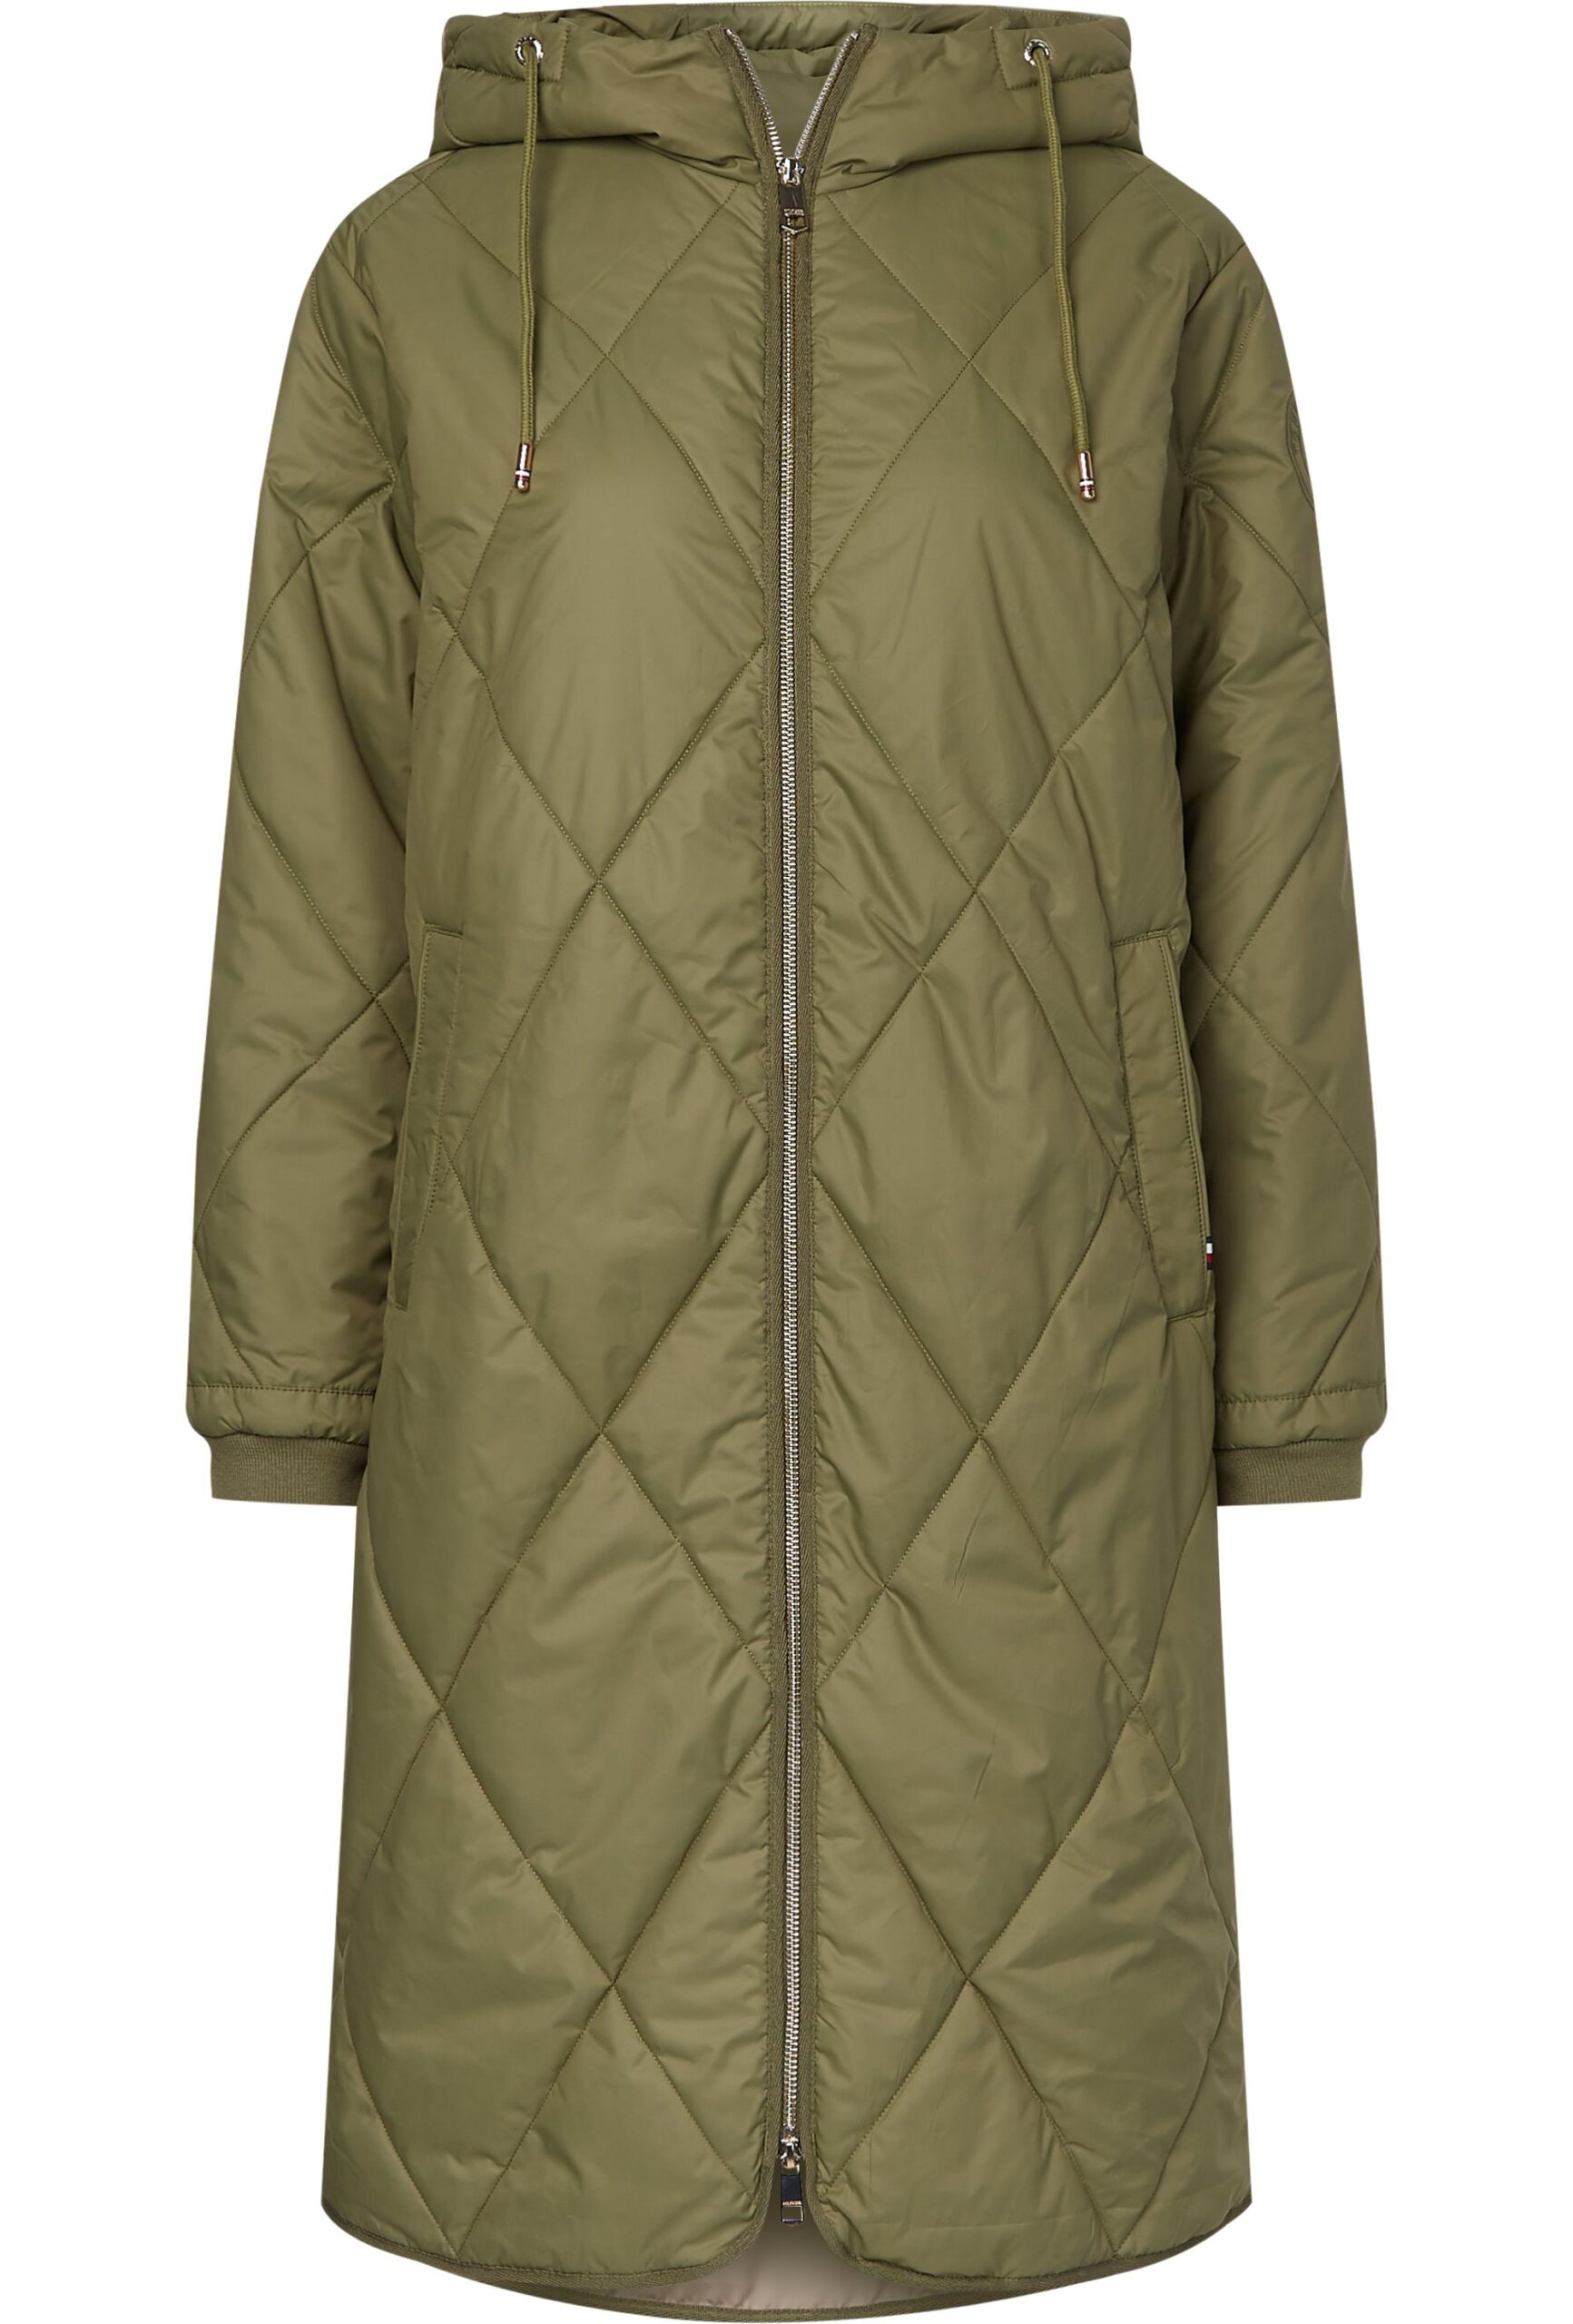 Tommy Hilfiger Sorona Quilted Coat